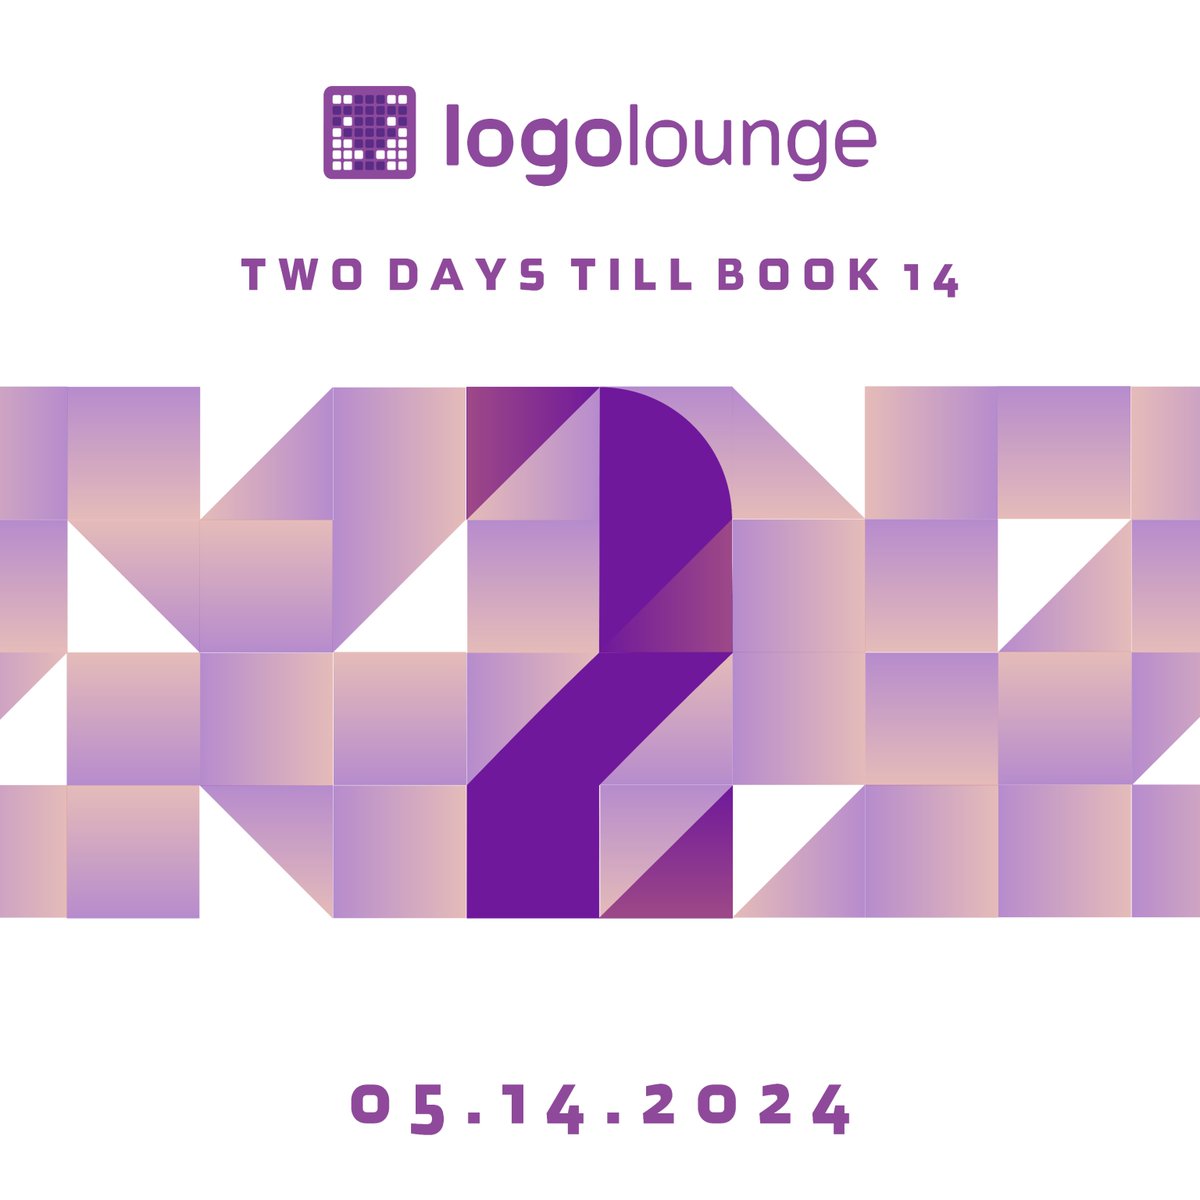 We're so close to May 14th for the 14th Book! 💜 #Book14 #logolounge #logolounge14 #logo